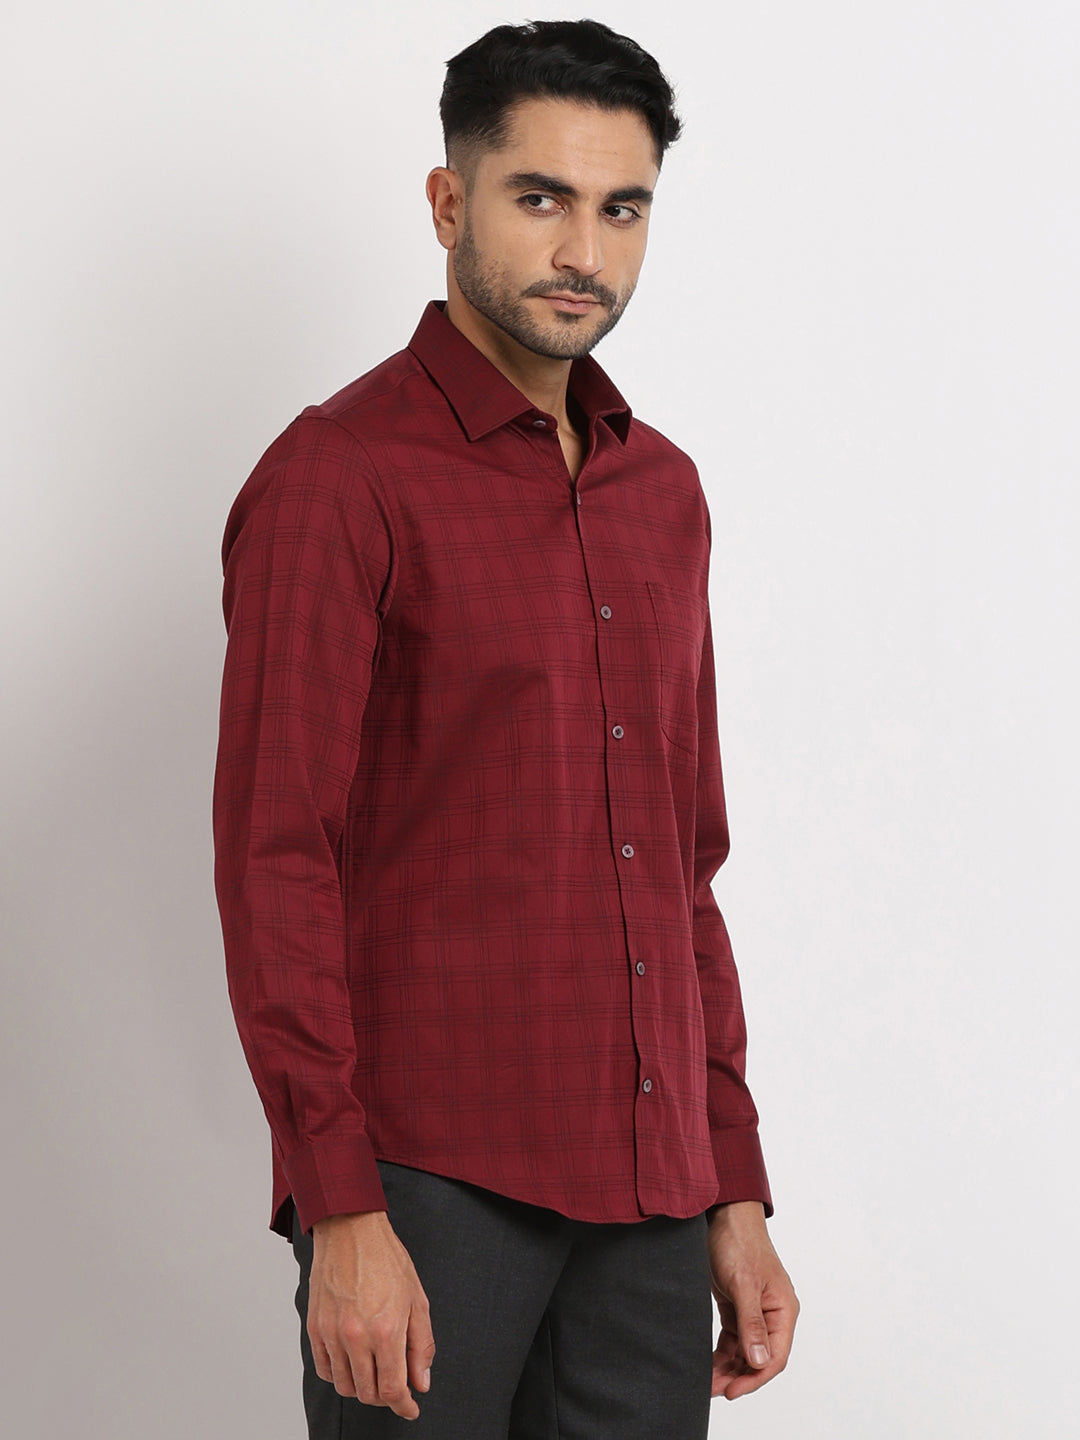 100% Cotton Maroon Checkered Slim Fit Full Sleeve Formal Shirt